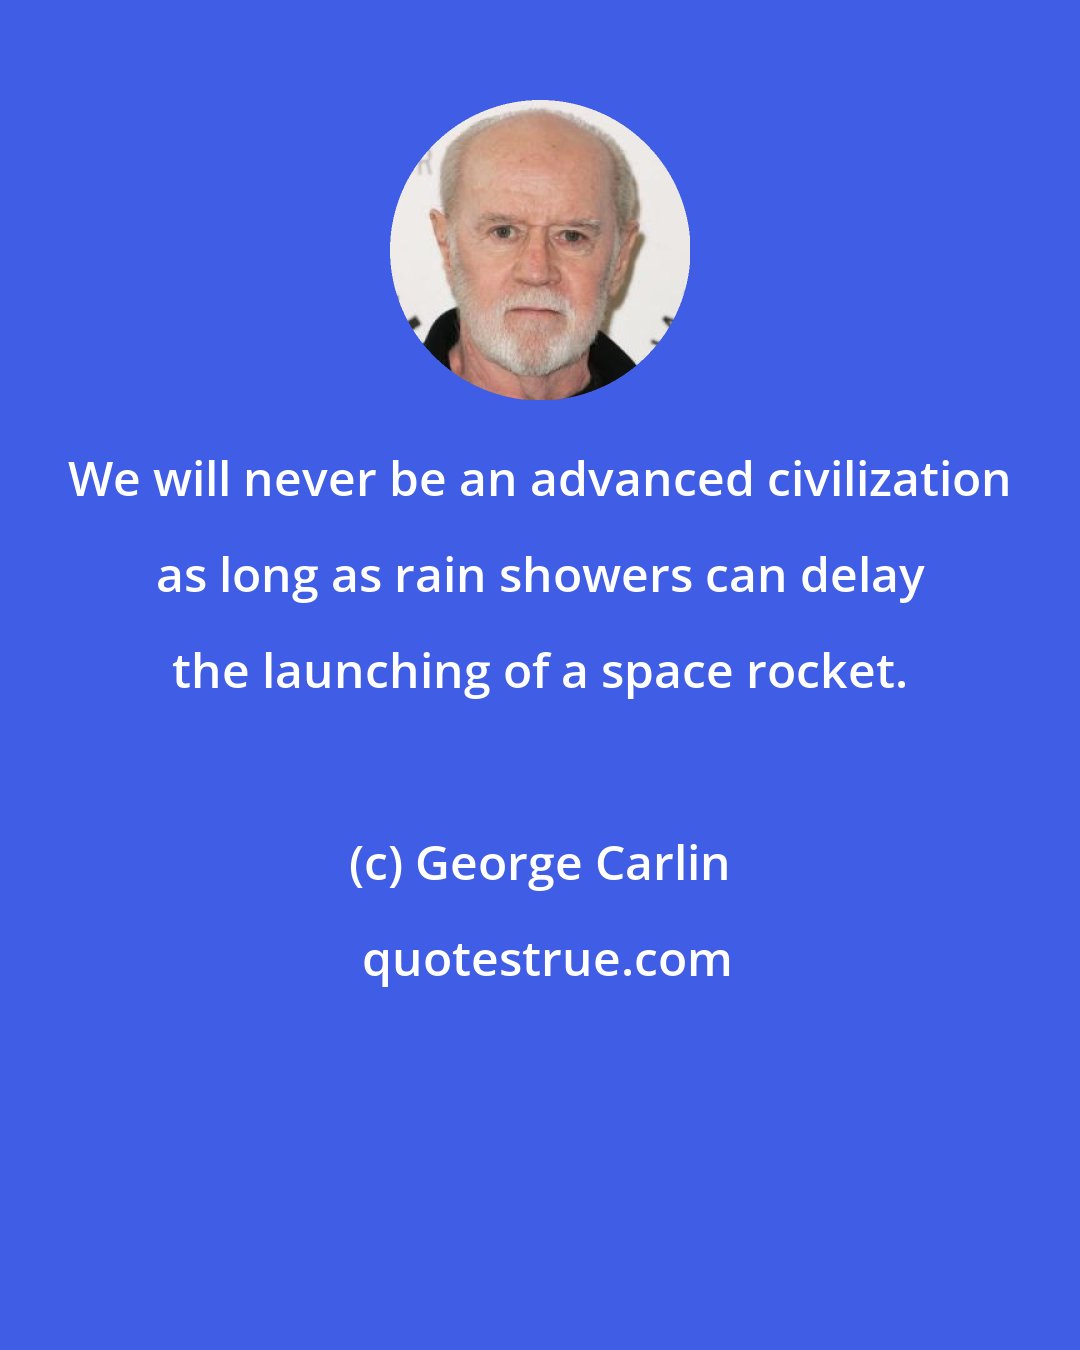 George Carlin: We will never be an advanced civilization as long as rain showers can delay the launching of a space rocket.